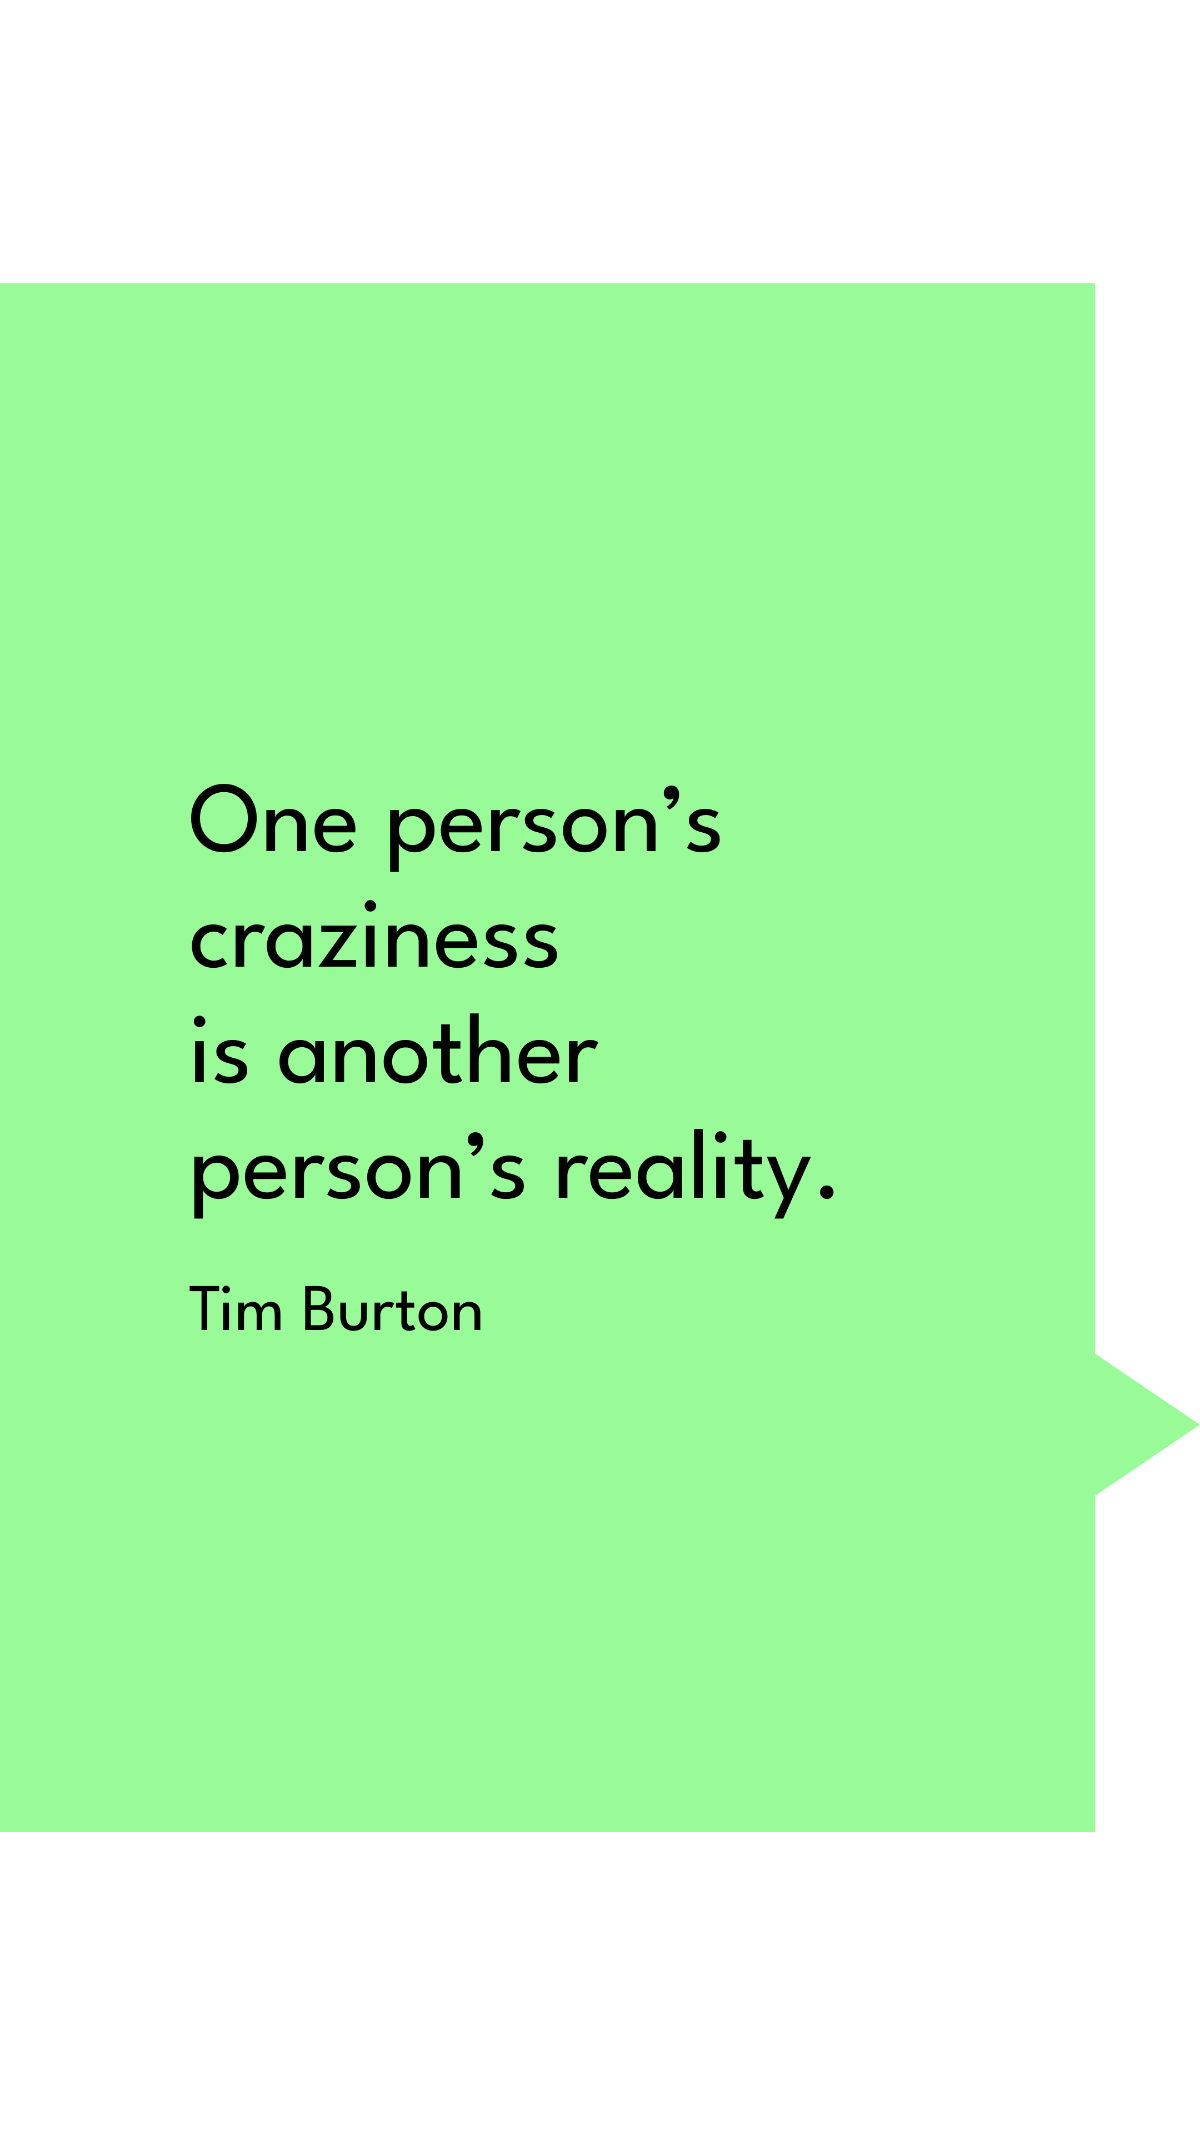 Tim Burton - One person’s craziness is another person’s reality.